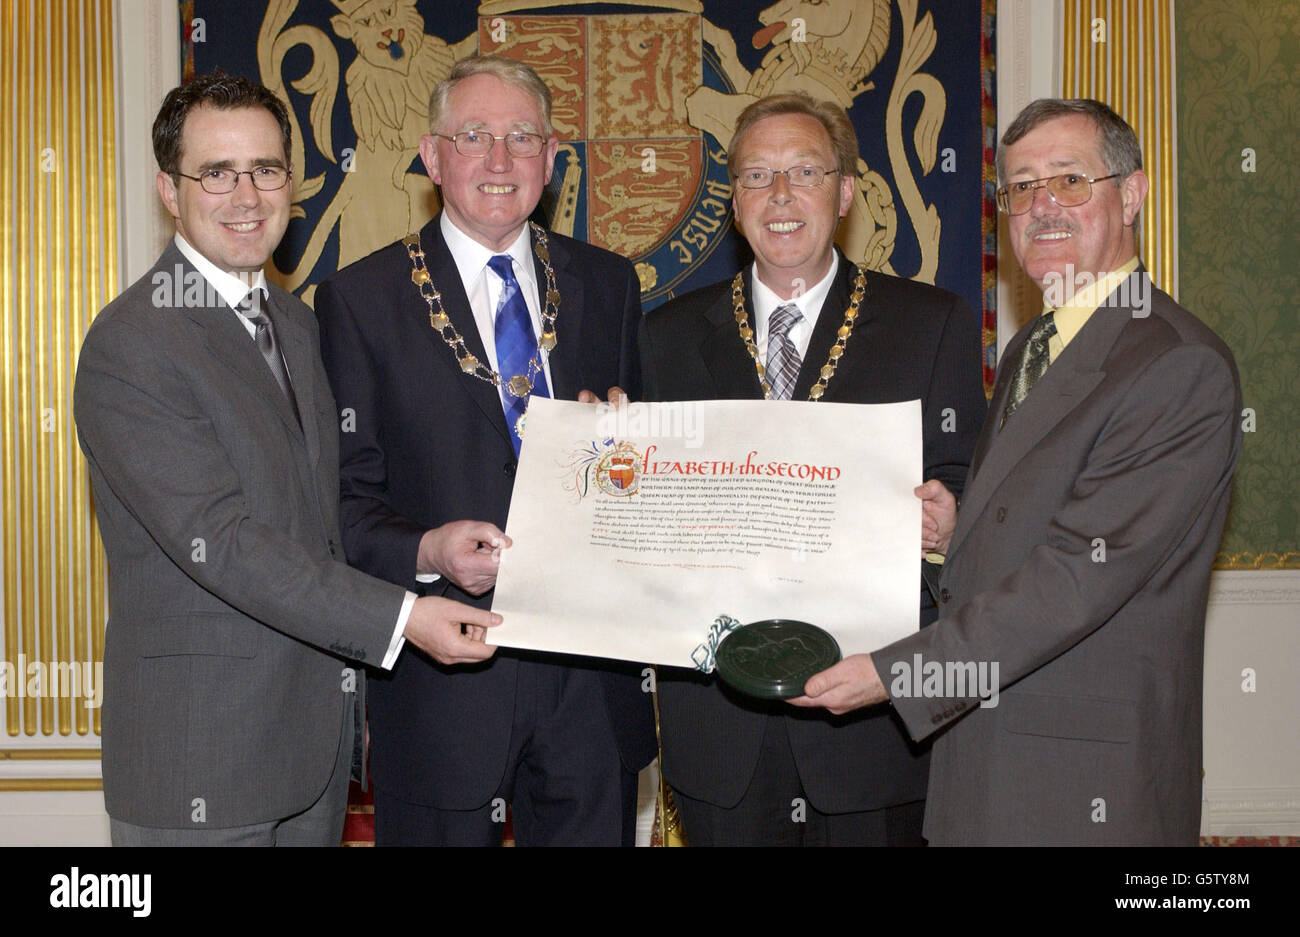 Newry dignitaries hold the Letters Patent endorsed by the Great Seal confering city status on Newry, Northern Ireland presented to the Vice-Chairman of Newry Council, * SDLP Councillor Frank Feely (second left) by Queen Elizabeth II in a ceremony at Hillsborough Castle during the second day of the Monarch's Golden Jubilee visit to Northern Ireland. With the Vice-Councillor are, from left, Newry City Centre Manager Barry Owens, Feely, President of Newry Chamber of Commerce and Trade Gerard O'Hare, and Chief Executive of Newry District Council Tom McCall. Stock Photo